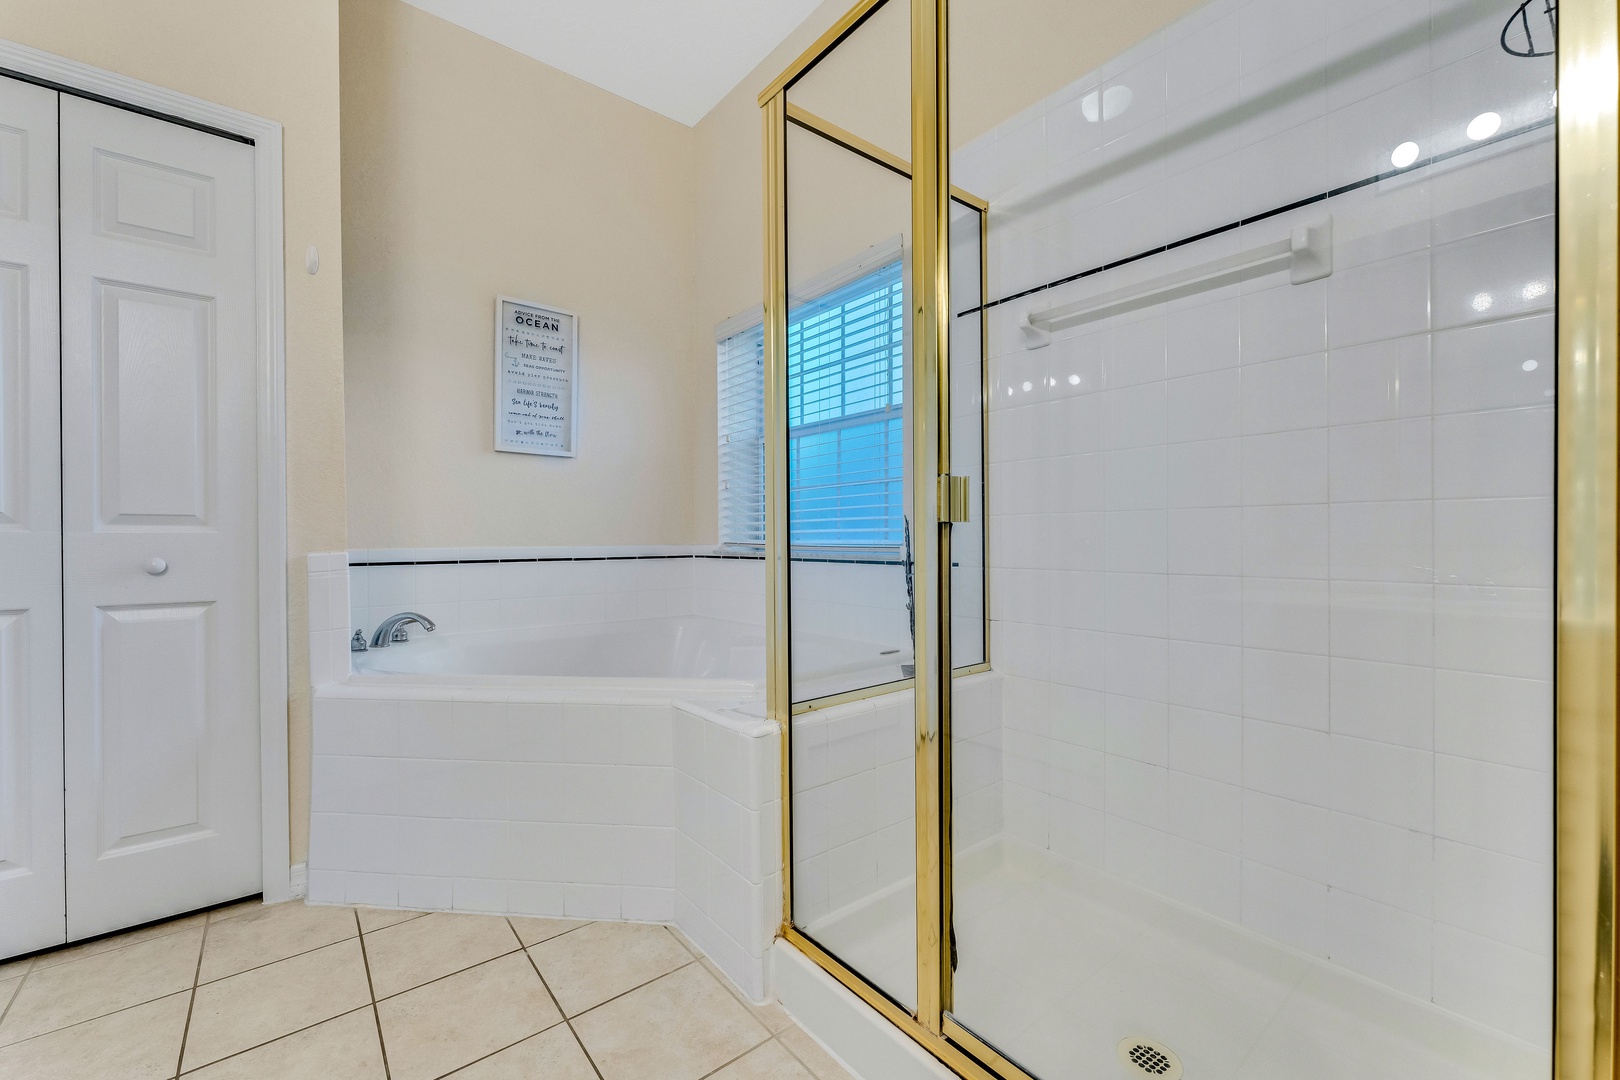 The king ensuite includes a dual vanity, glass shower, & luxe soaking tub